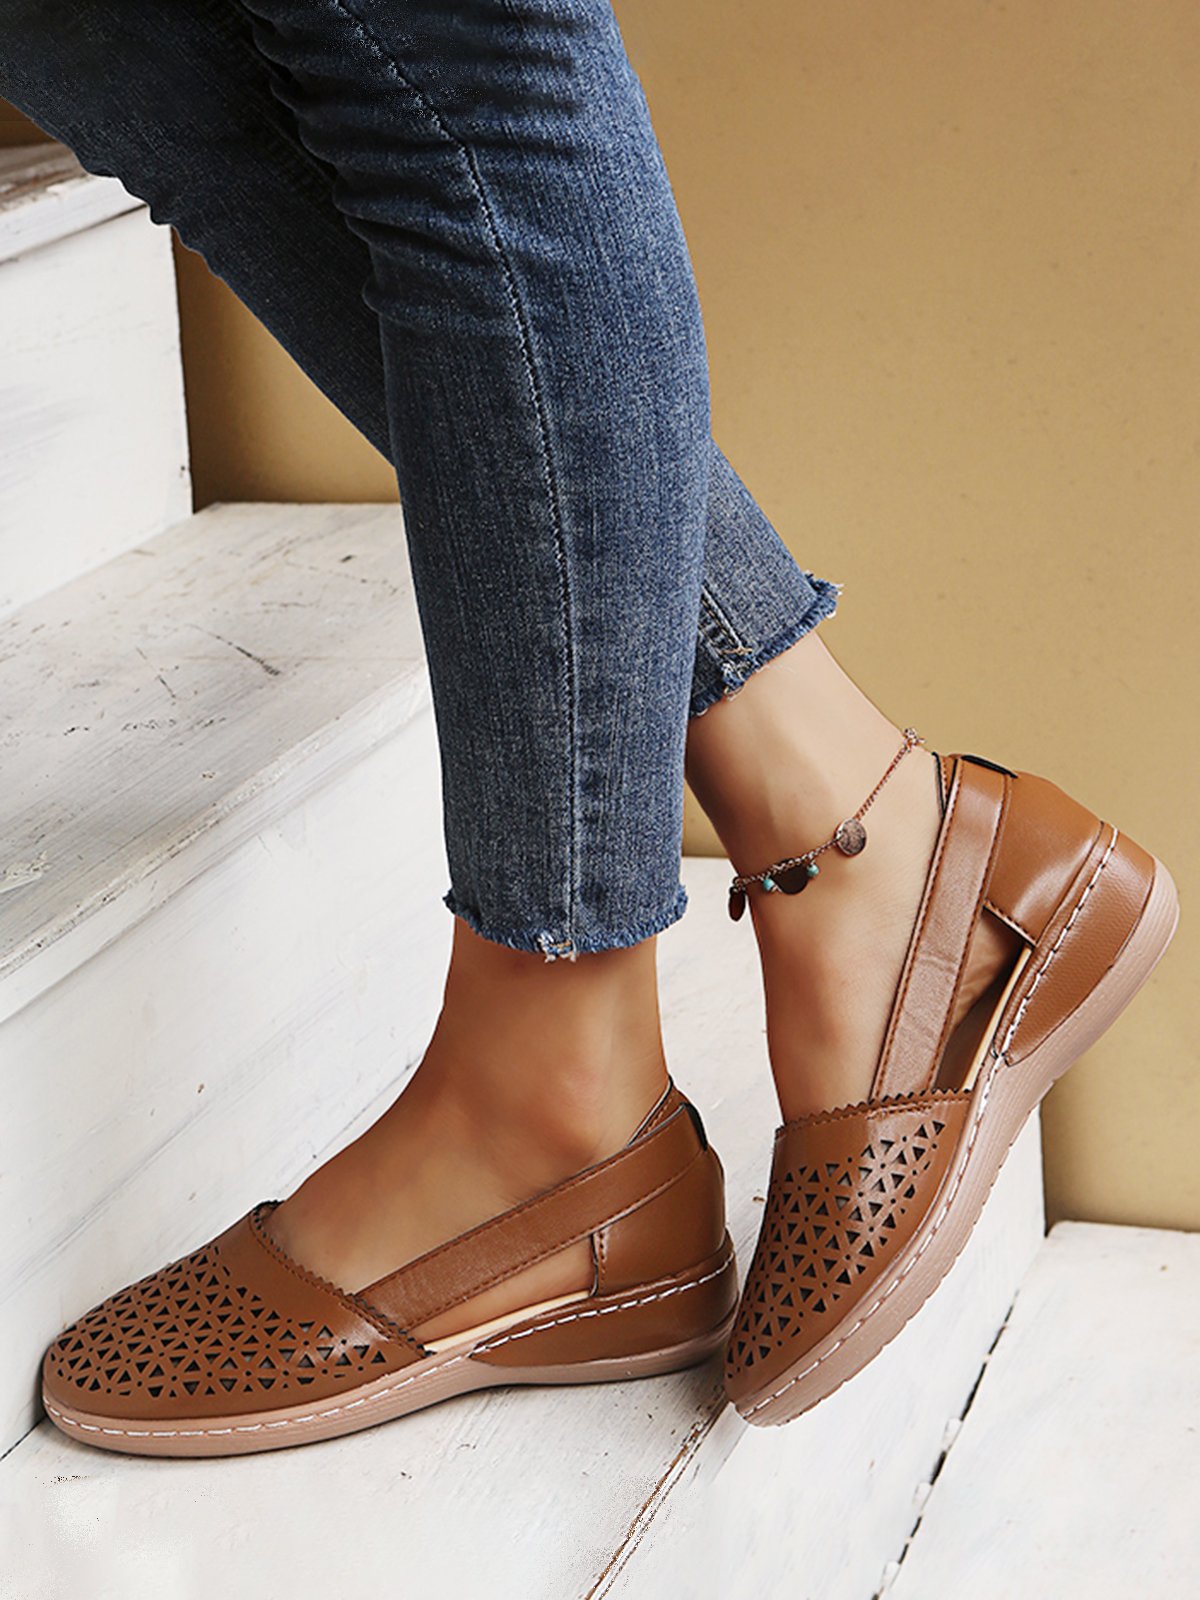 Autumn Flats/loafers